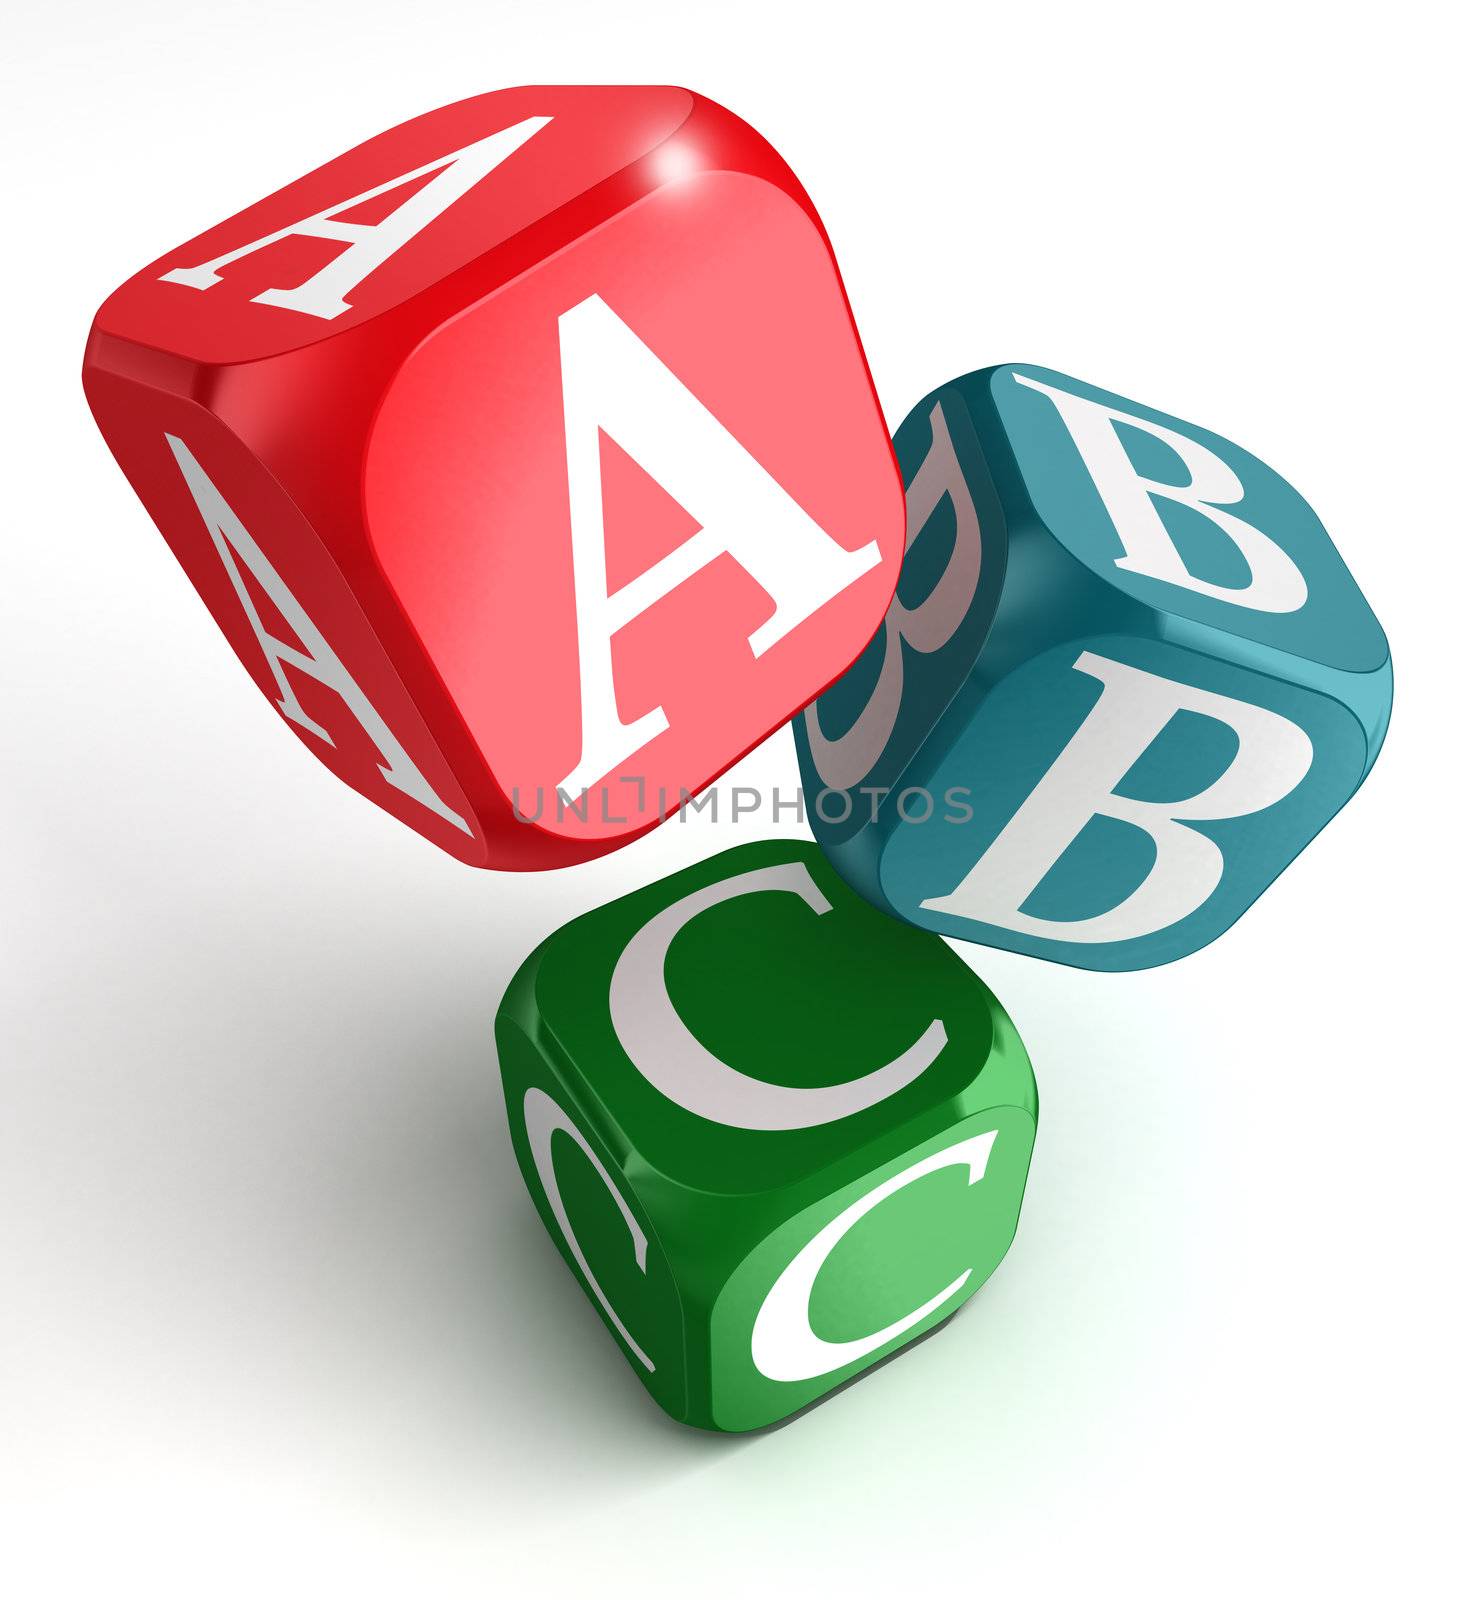 A,B and C on red, blue and green box by donskarpo